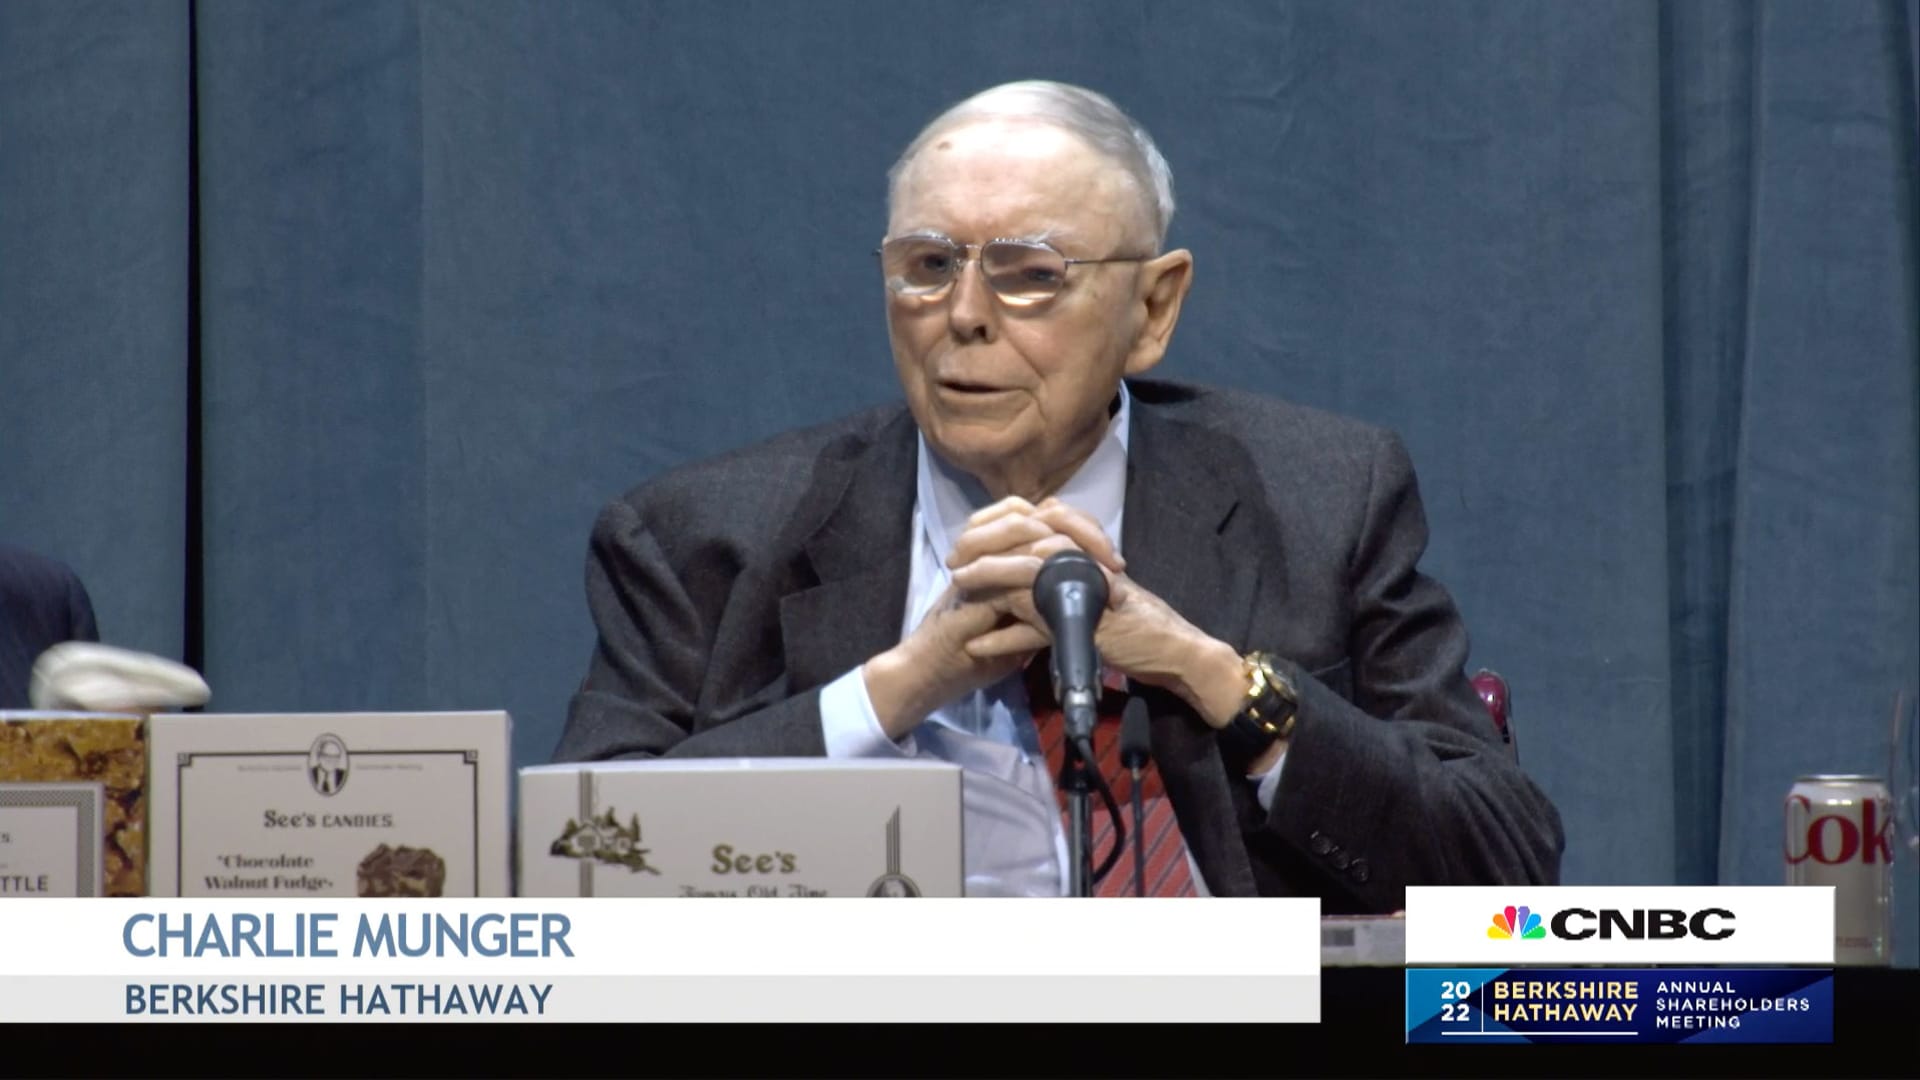 Charlie Munger says the U.S. should follow in China’s footsteps and ban cryptocurrencies